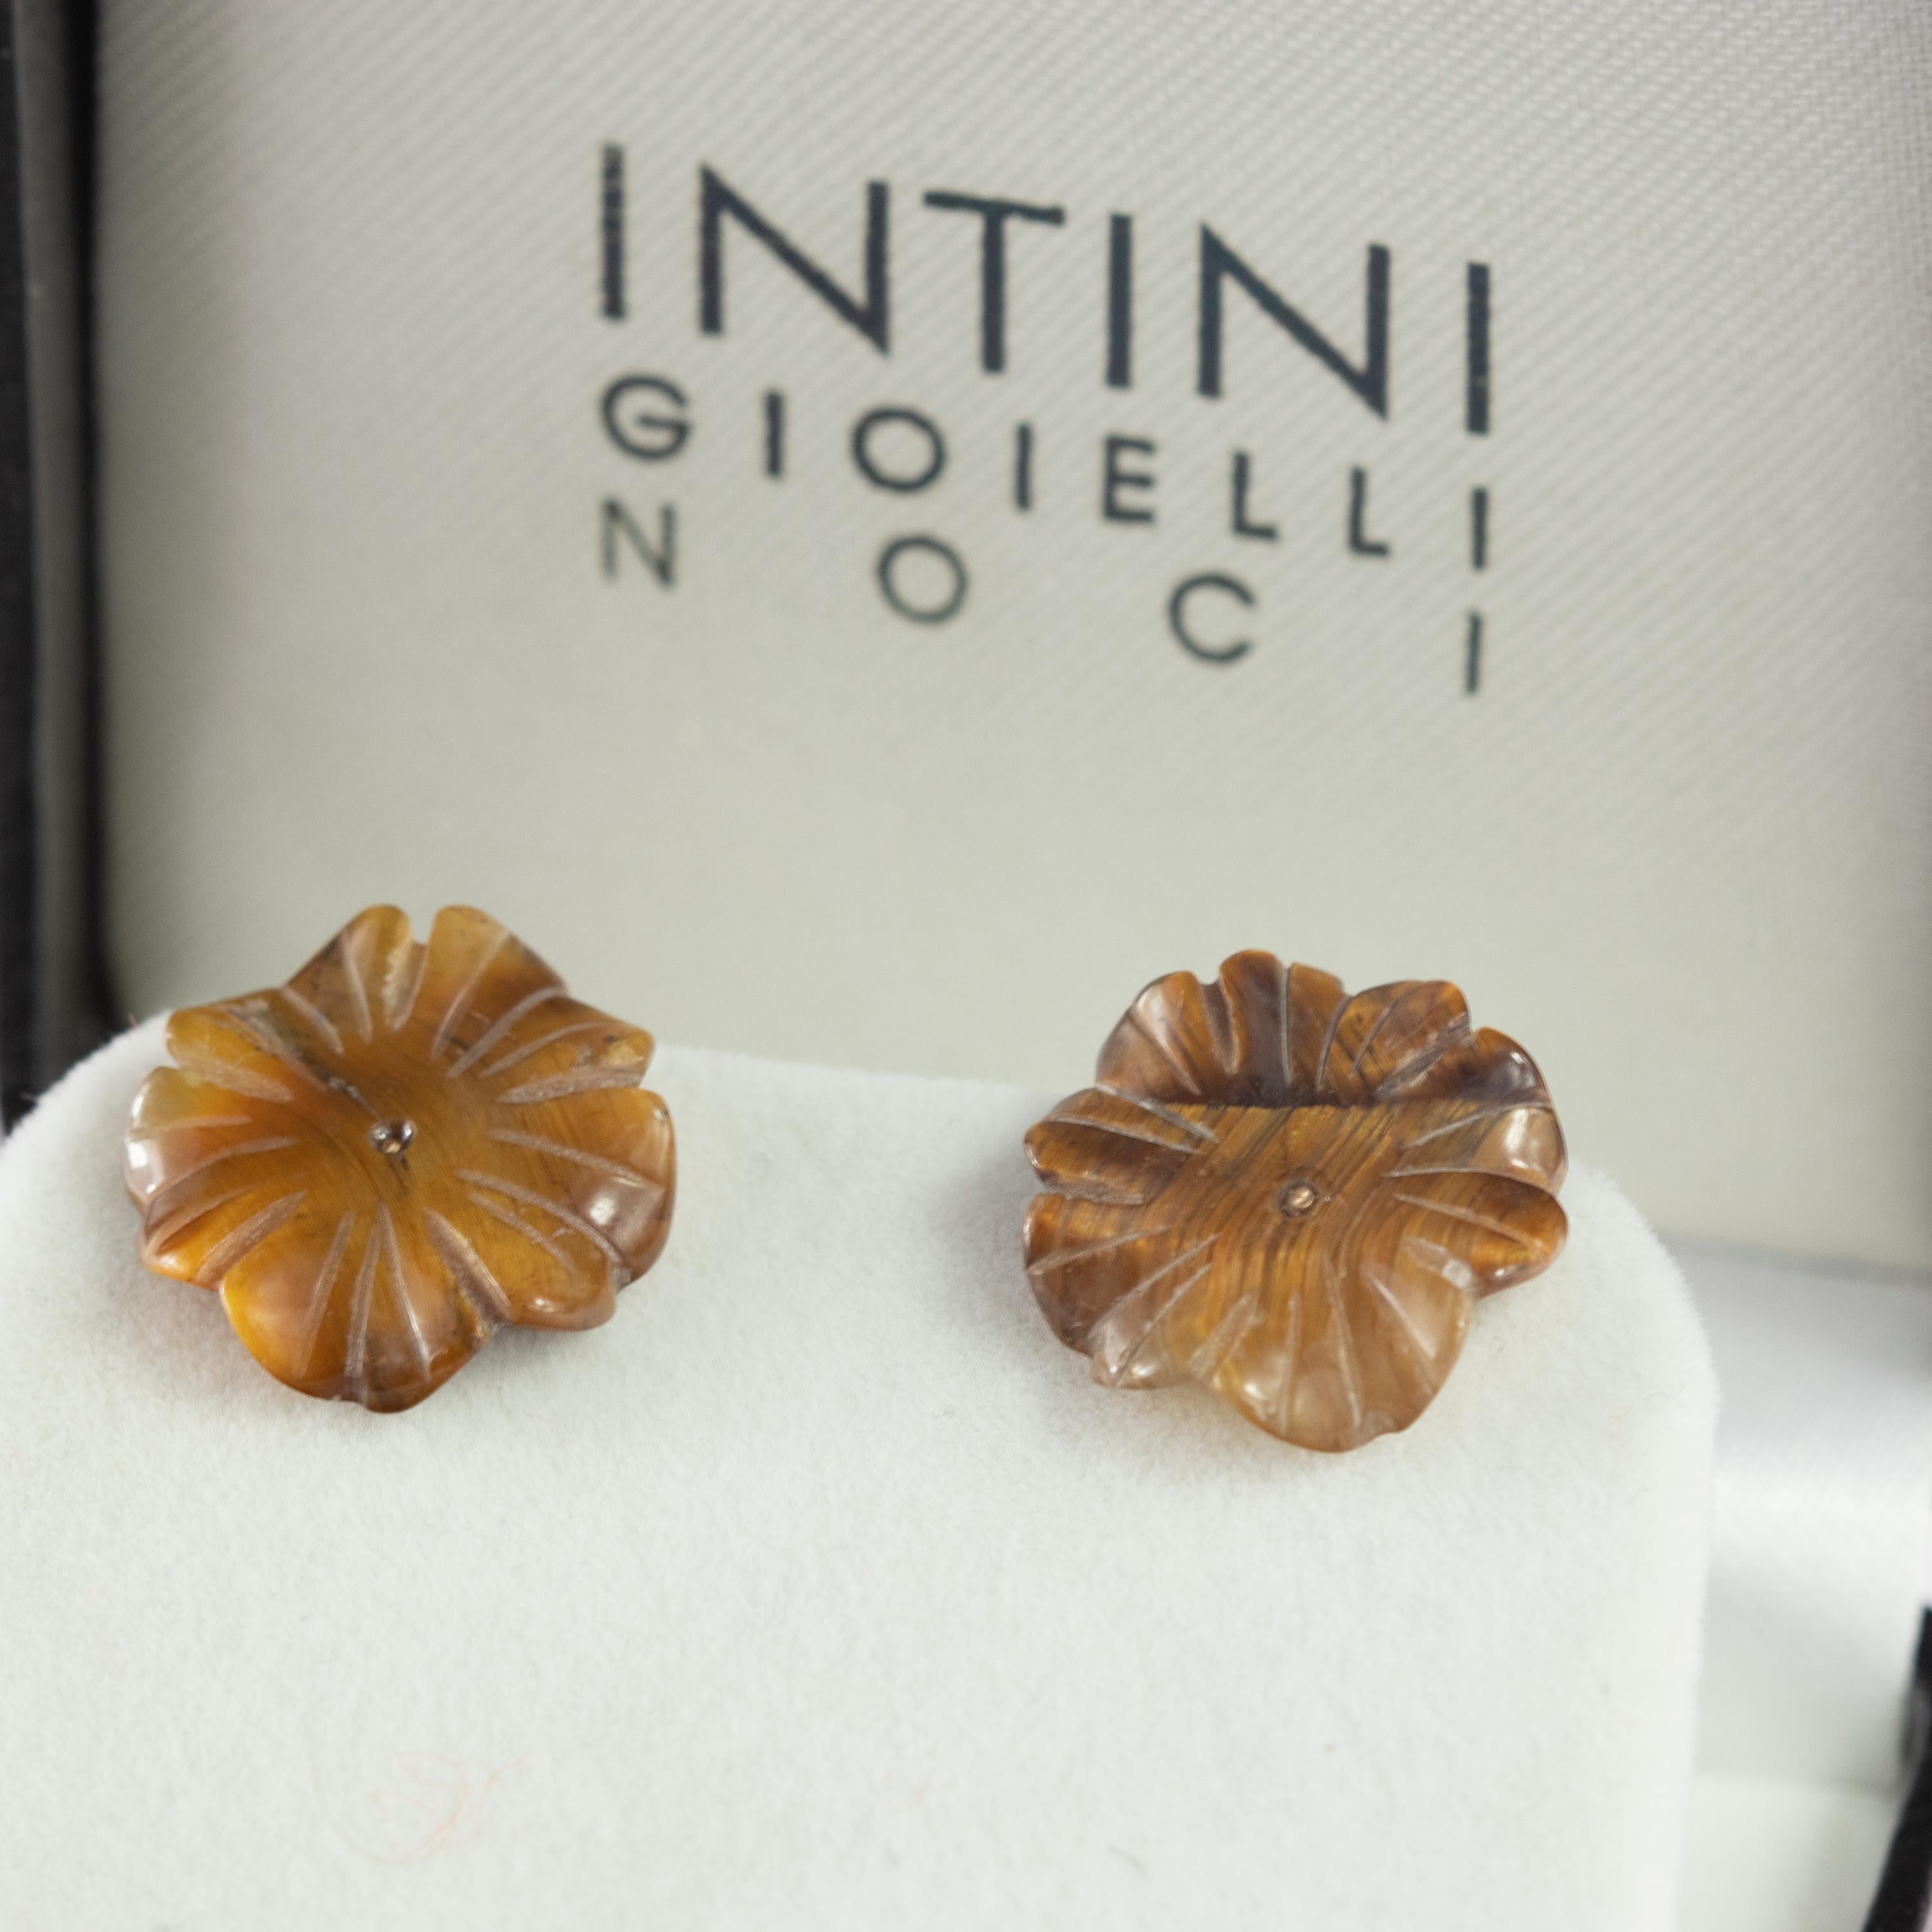 Stunning and sweet 15 carat brown Tiger's eye flower stud earrings. Carved petals that evoke the italian handmade traditional jewelry work, wrapping itself in a soft look enriched with 14 karat yellow gold manifesting glamour and exquisite taste. 
